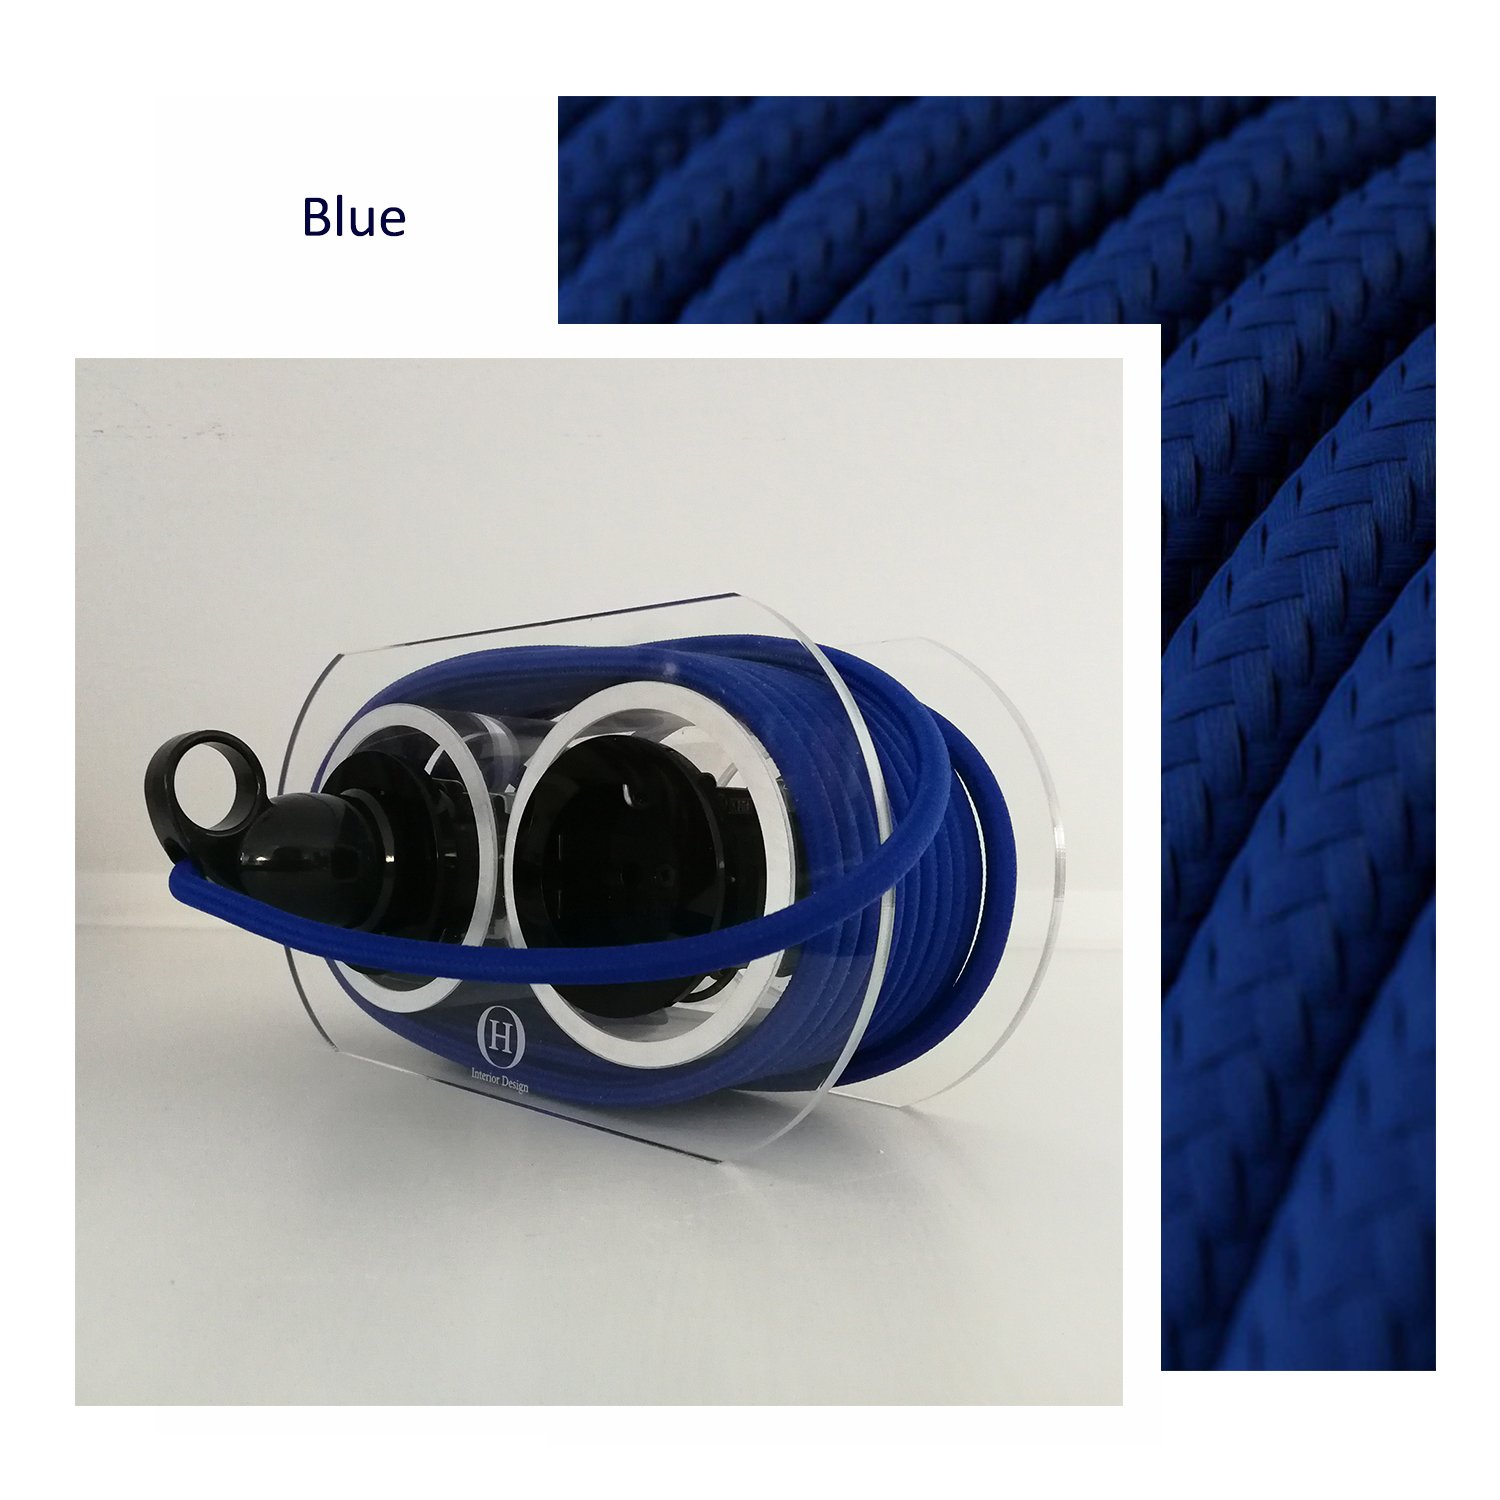 Extension Cord for 4 Plugs_Blue.jpg